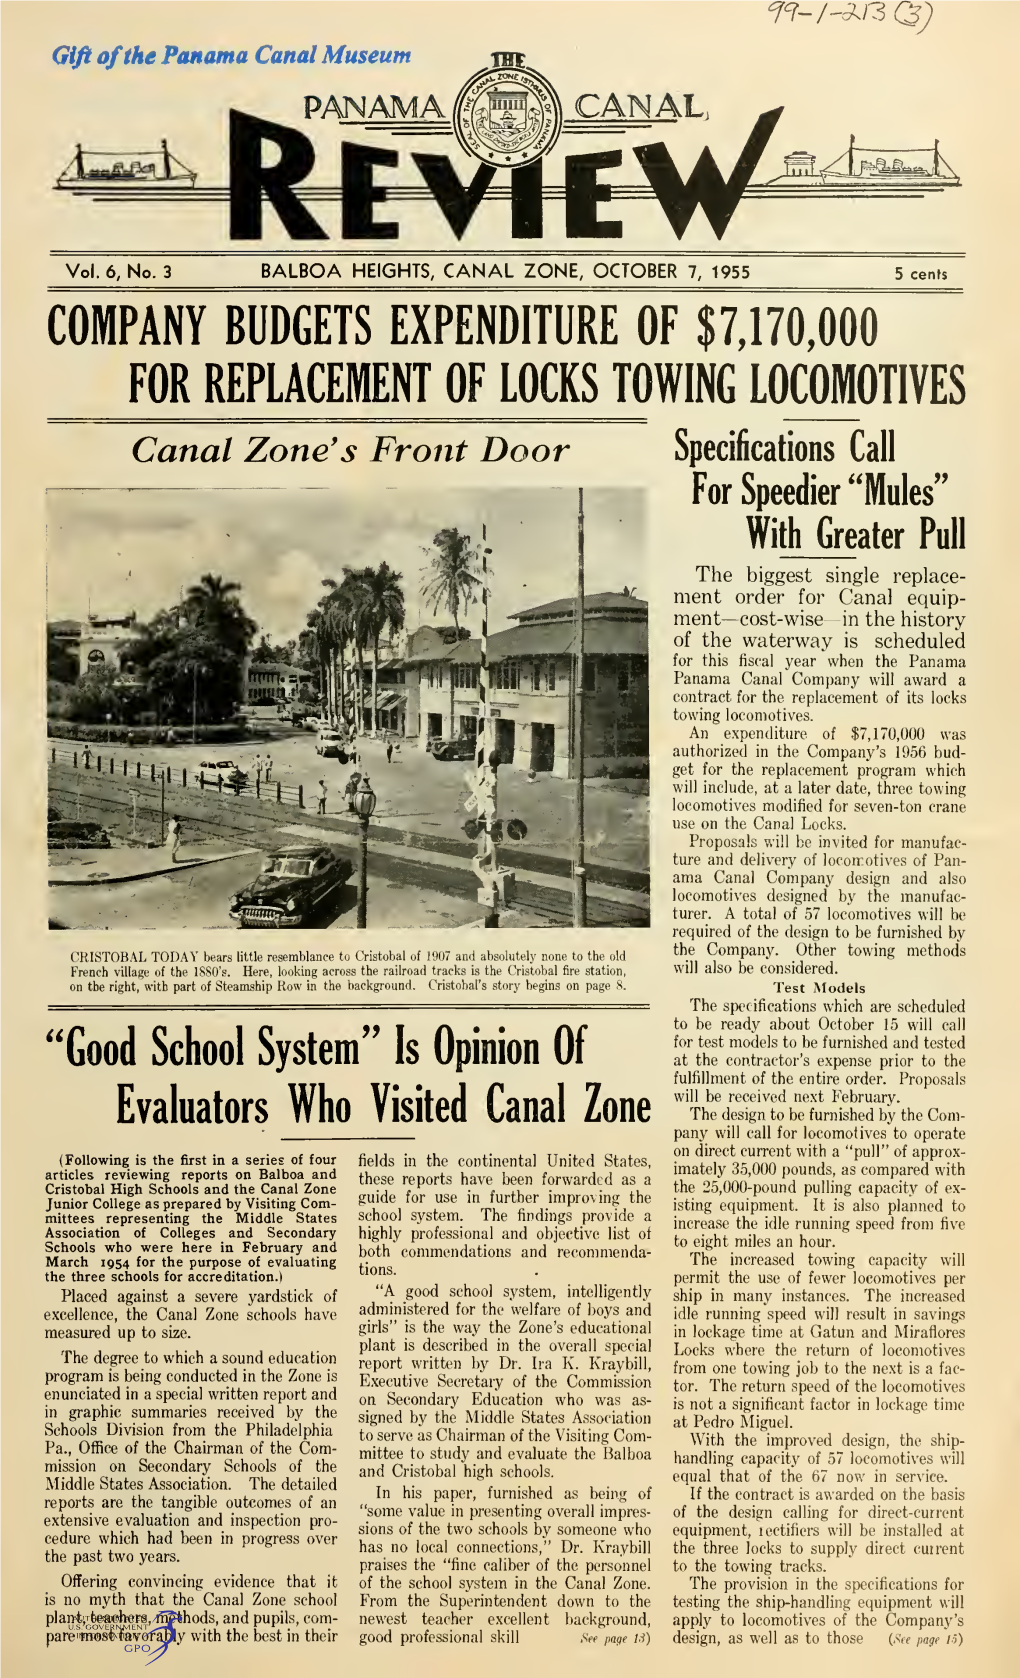 THE PANAMA CANAL REVIEW October 7,1955